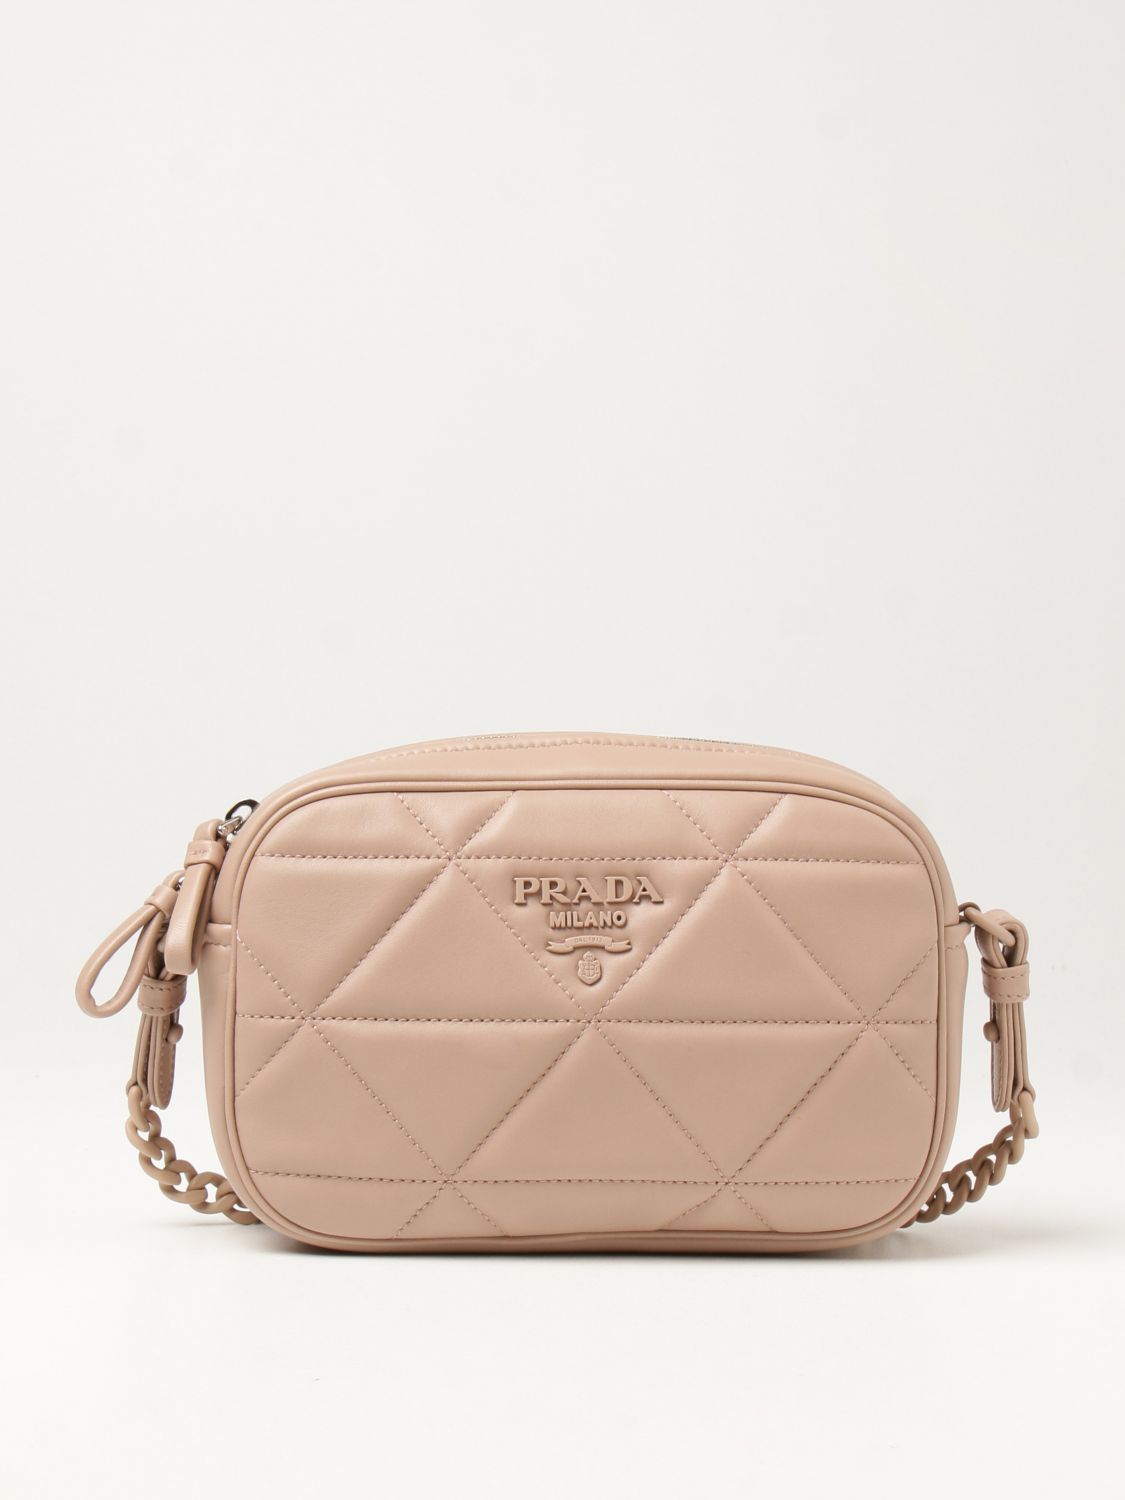 Bags from Prada for Women in Pink